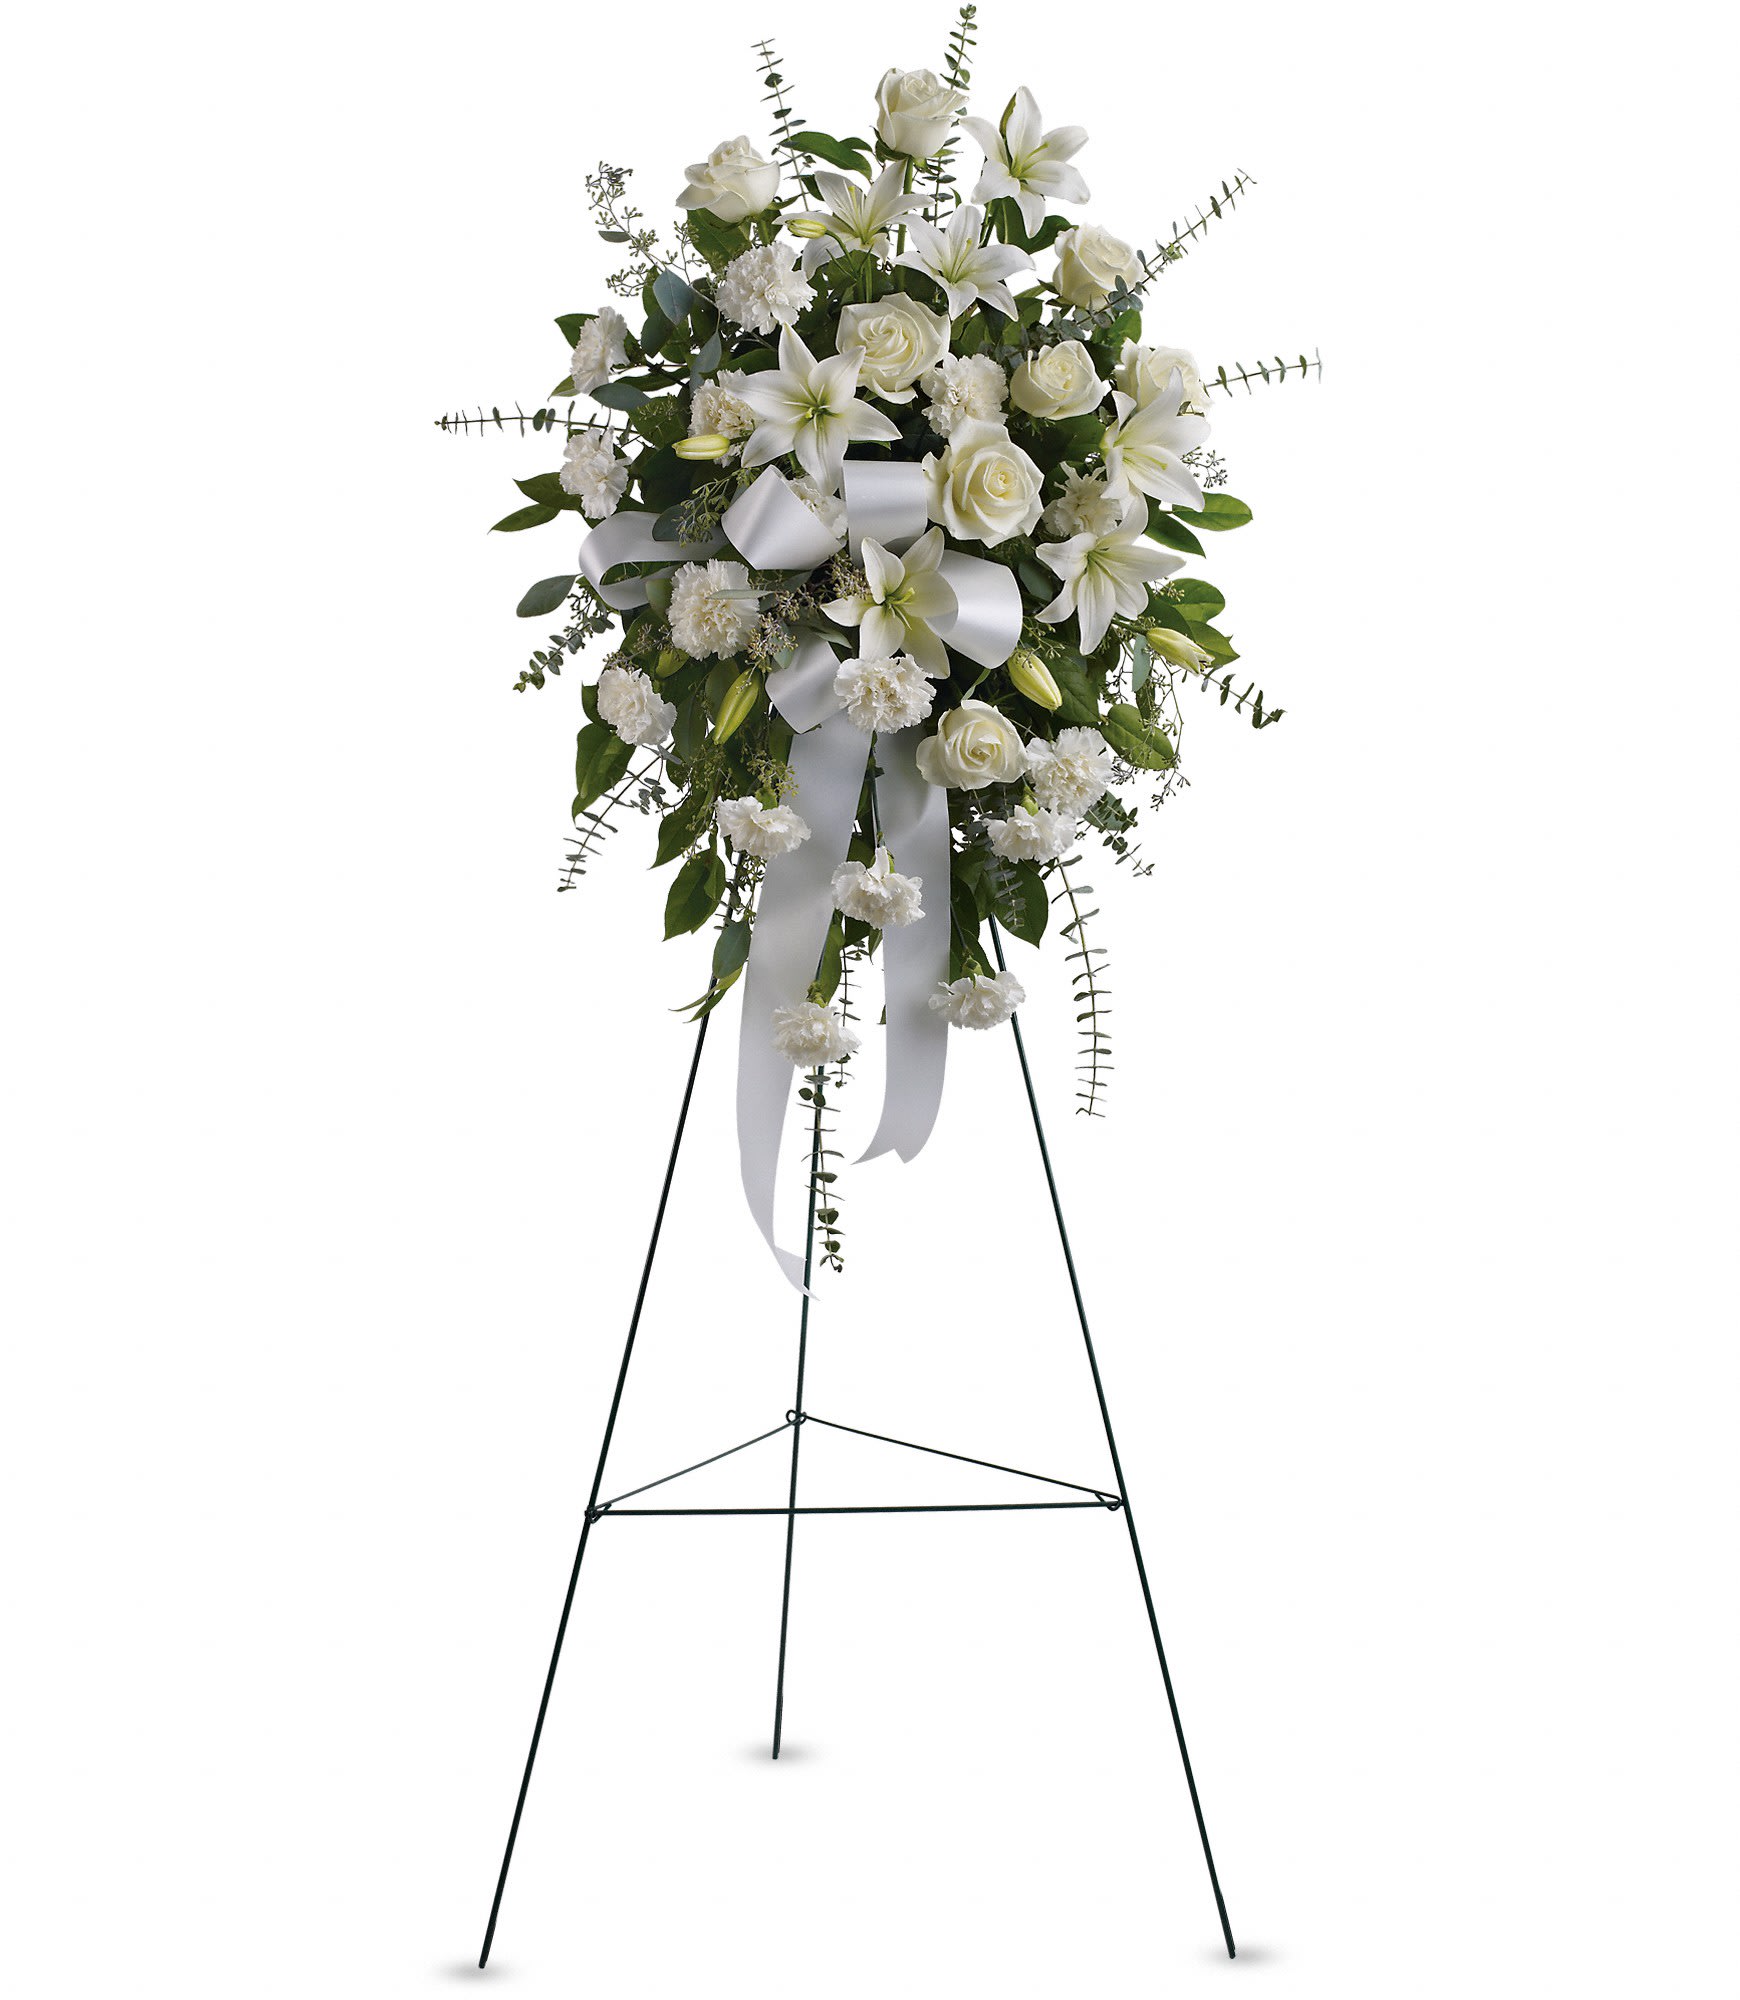 Sentiments of Serenity Spray by Teleflora - Beautifully simple, this lovely spray of white roses, lilies and carnations decorated with white satin ribbon is a tasteful way to express your sympathy. 